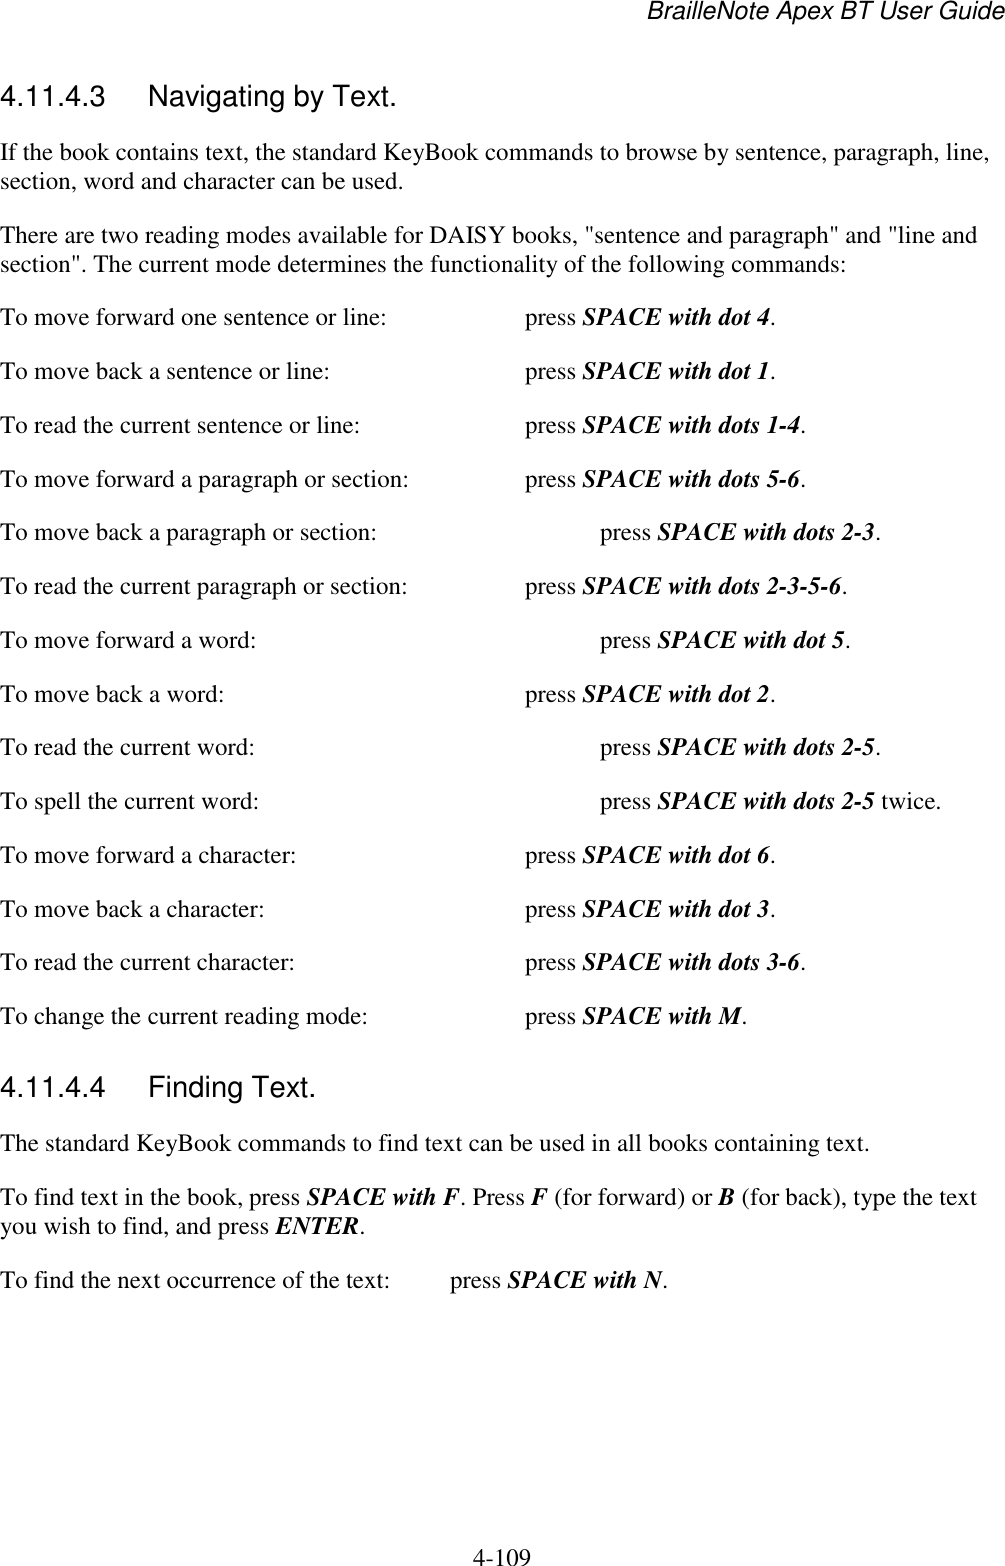 BrailleNote Apex BT User Guide   4-109   4.11.4.3  Navigating by Text. If the book contains text, the standard KeyBook commands to browse by sentence, paragraph, line, section, word and character can be used. There are two reading modes available for DAISY books, &quot;sentence and paragraph&quot; and &quot;line and section&quot;. The current mode determines the functionality of the following commands: To move forward one sentence or line:     press SPACE with dot 4. To move back a sentence or line:      press SPACE with dot 1. To read the current sentence or line:      press SPACE with dots 1-4. To move forward a paragraph or section:    press SPACE with dots 5-6. To move back a paragraph or section:       press SPACE with dots 2-3. To read the current paragraph or section:    press SPACE with dots 2-3-5-6. To move forward a word:          press SPACE with dot 5. To move back a word:        press SPACE with dot 2. To read the current word:          press SPACE with dots 2-5. To spell the current word:          press SPACE with dots 2-5 twice. To move forward a character:       press SPACE with dot 6. To move back a character:        press SPACE with dot 3. To read the current character:       press SPACE with dots 3-6. To change the current reading mode:     press SPACE with M.  4.11.4.4  Finding Text. The standard KeyBook commands to find text can be used in all books containing text.  To find text in the book, press SPACE with F. Press F (for forward) or B (for back), type the text you wish to find, and press ENTER. To find the next occurrence of the text:  press SPACE with N.  